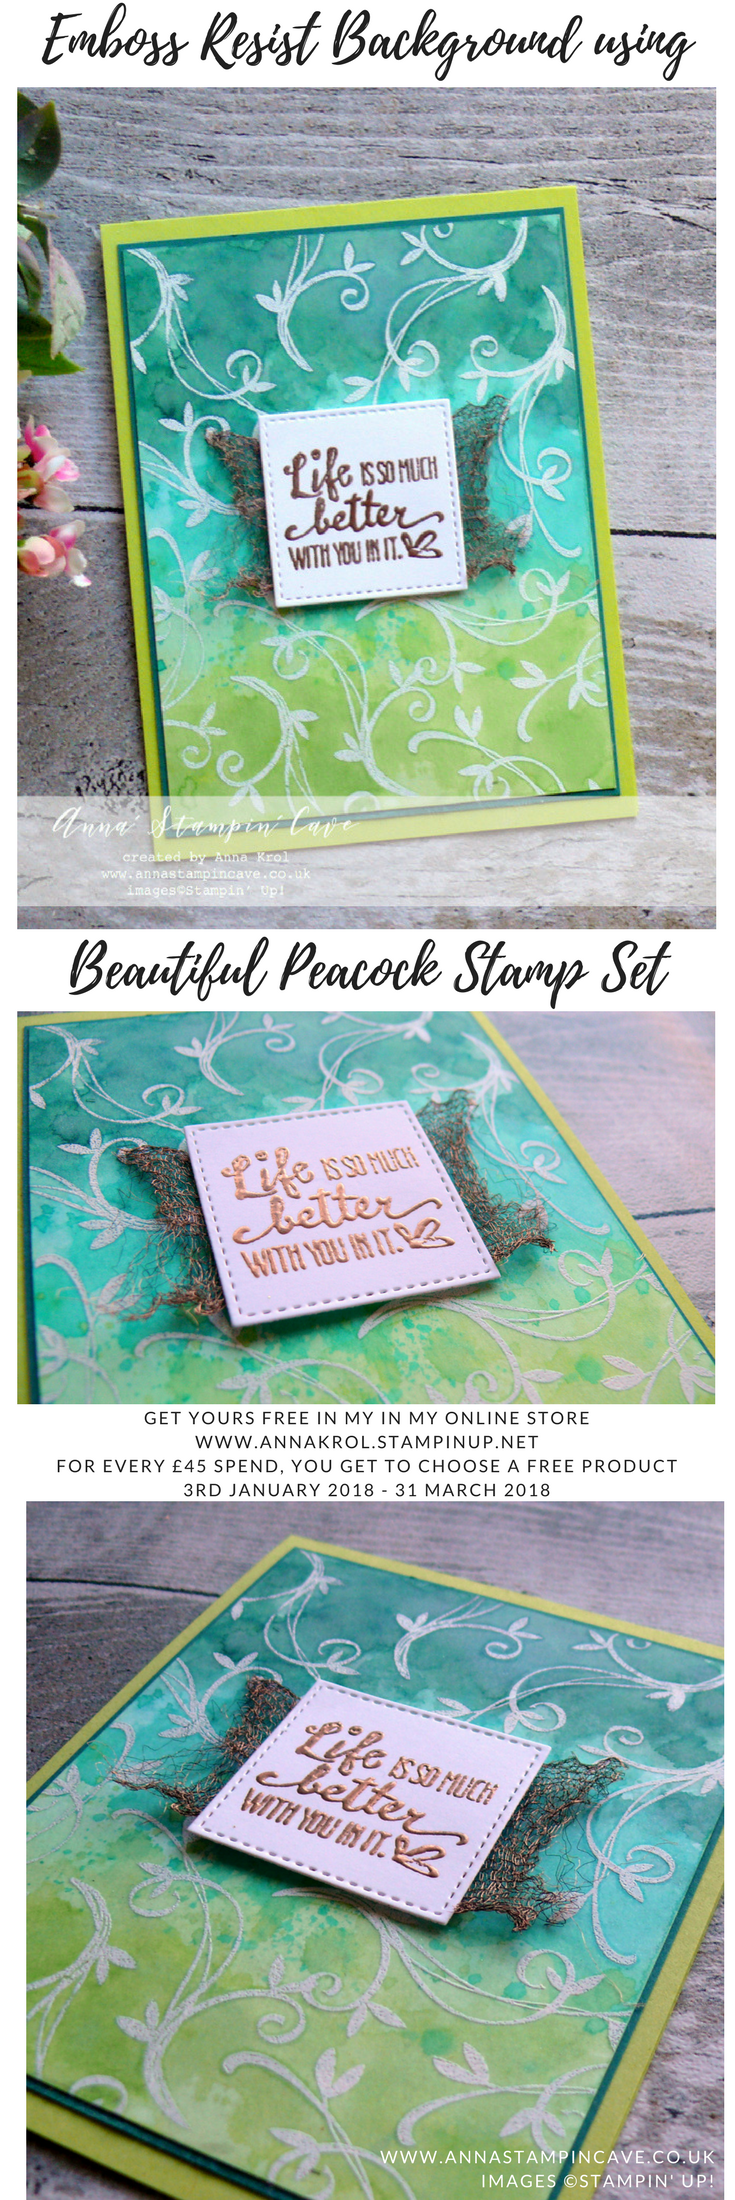 Anna' Stampin' Cave - Emboss Resist Watercolour background using Beautiful Peacock Stamp Set